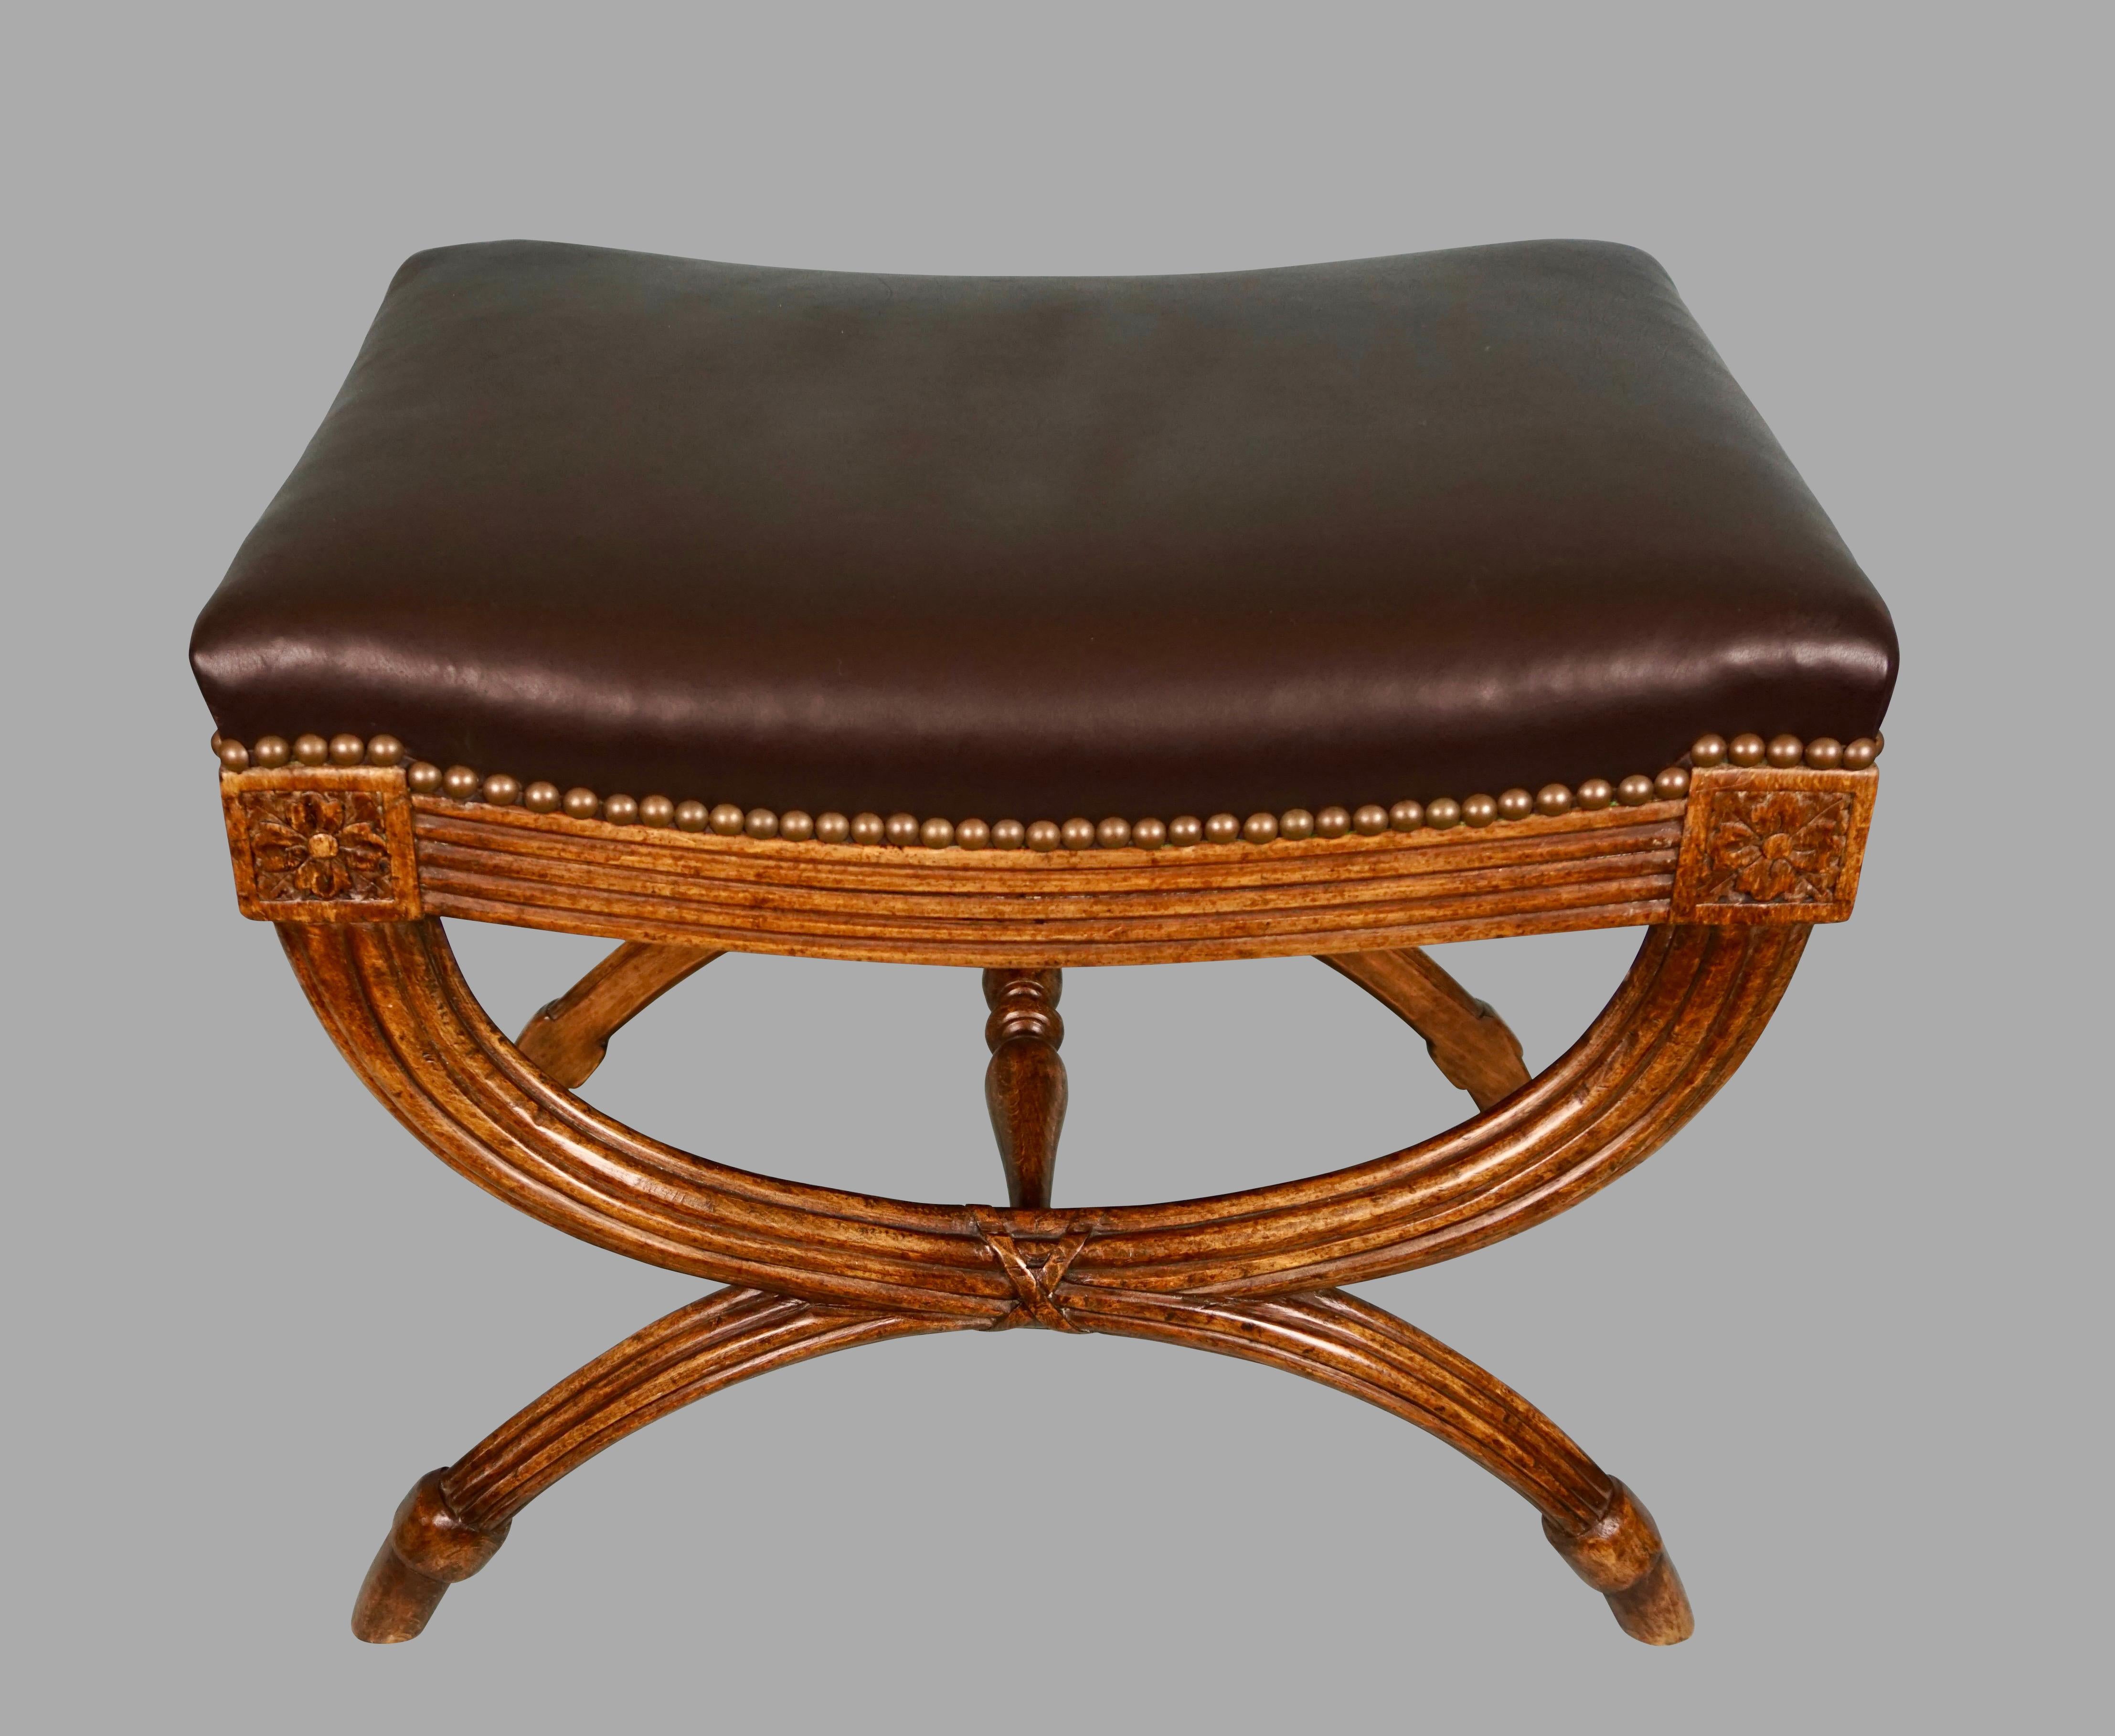 An elegant English Regency style mahogany curule form bench, the reeded frame terminating in carved floral bosses, the legs connected by a turned stretcher and ending in hoof feet. The piece is handsomely upholstered in black hide with brass